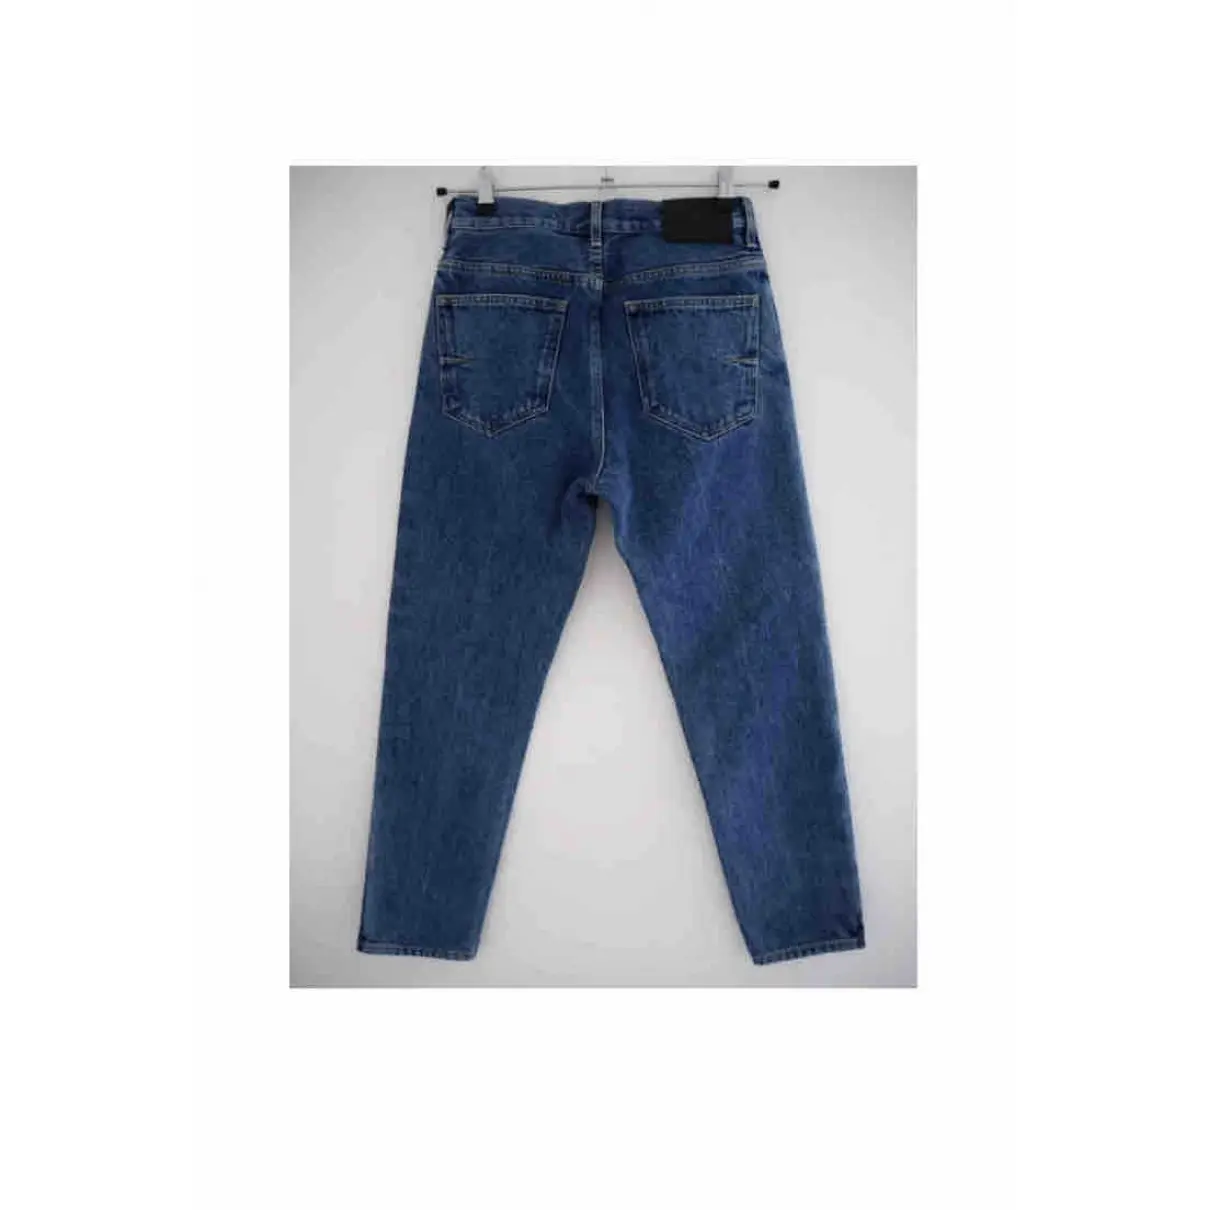 Buy Mauro Grifoni Slim jeans online